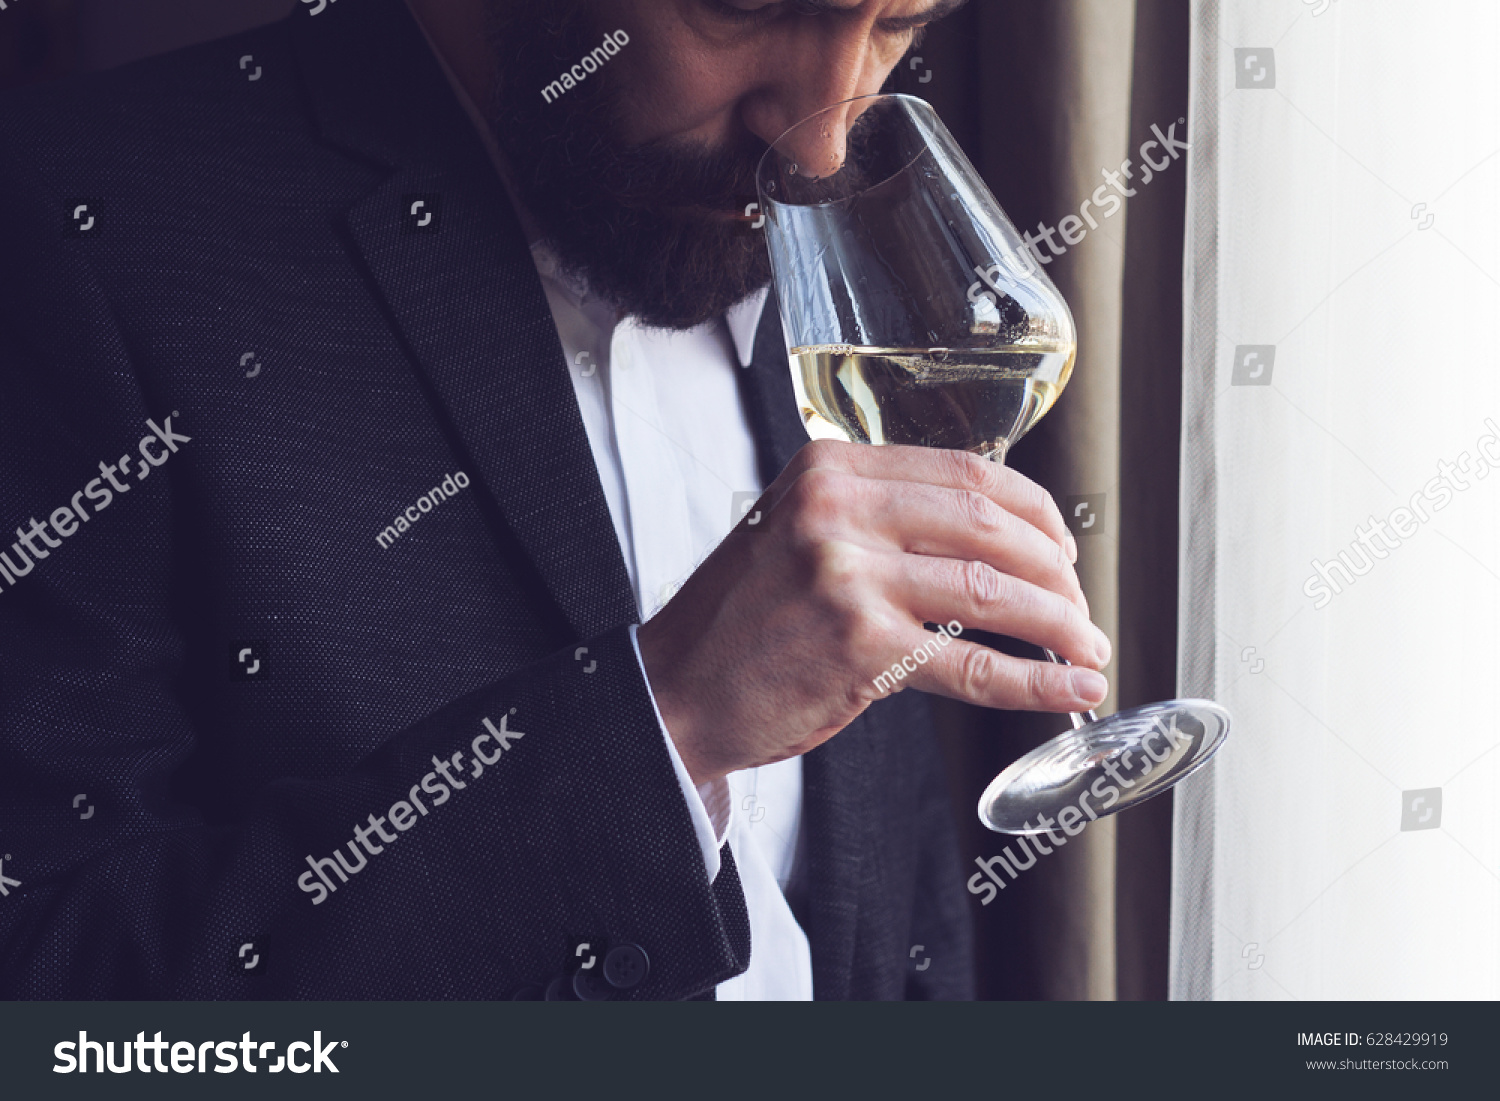 horizontal close up of a Caucasian man with beard black suit and white shirt tasting a glass of white wine by the window natural lighting #628429919